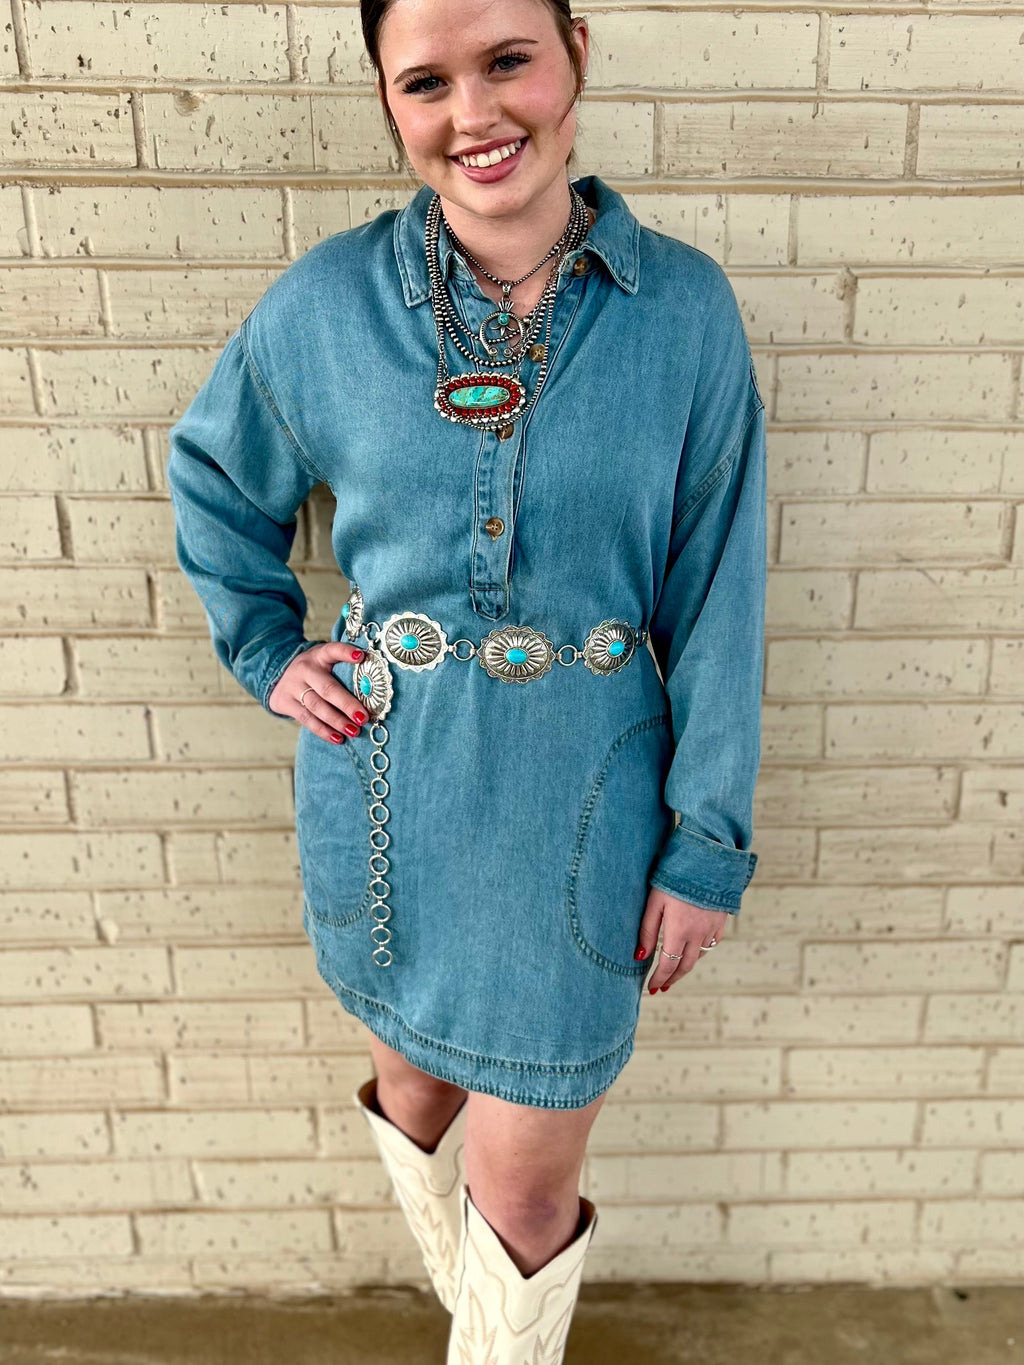 long sleeve, denim, knee length. Woman Owned Business. Small Business. Get Gussied Up